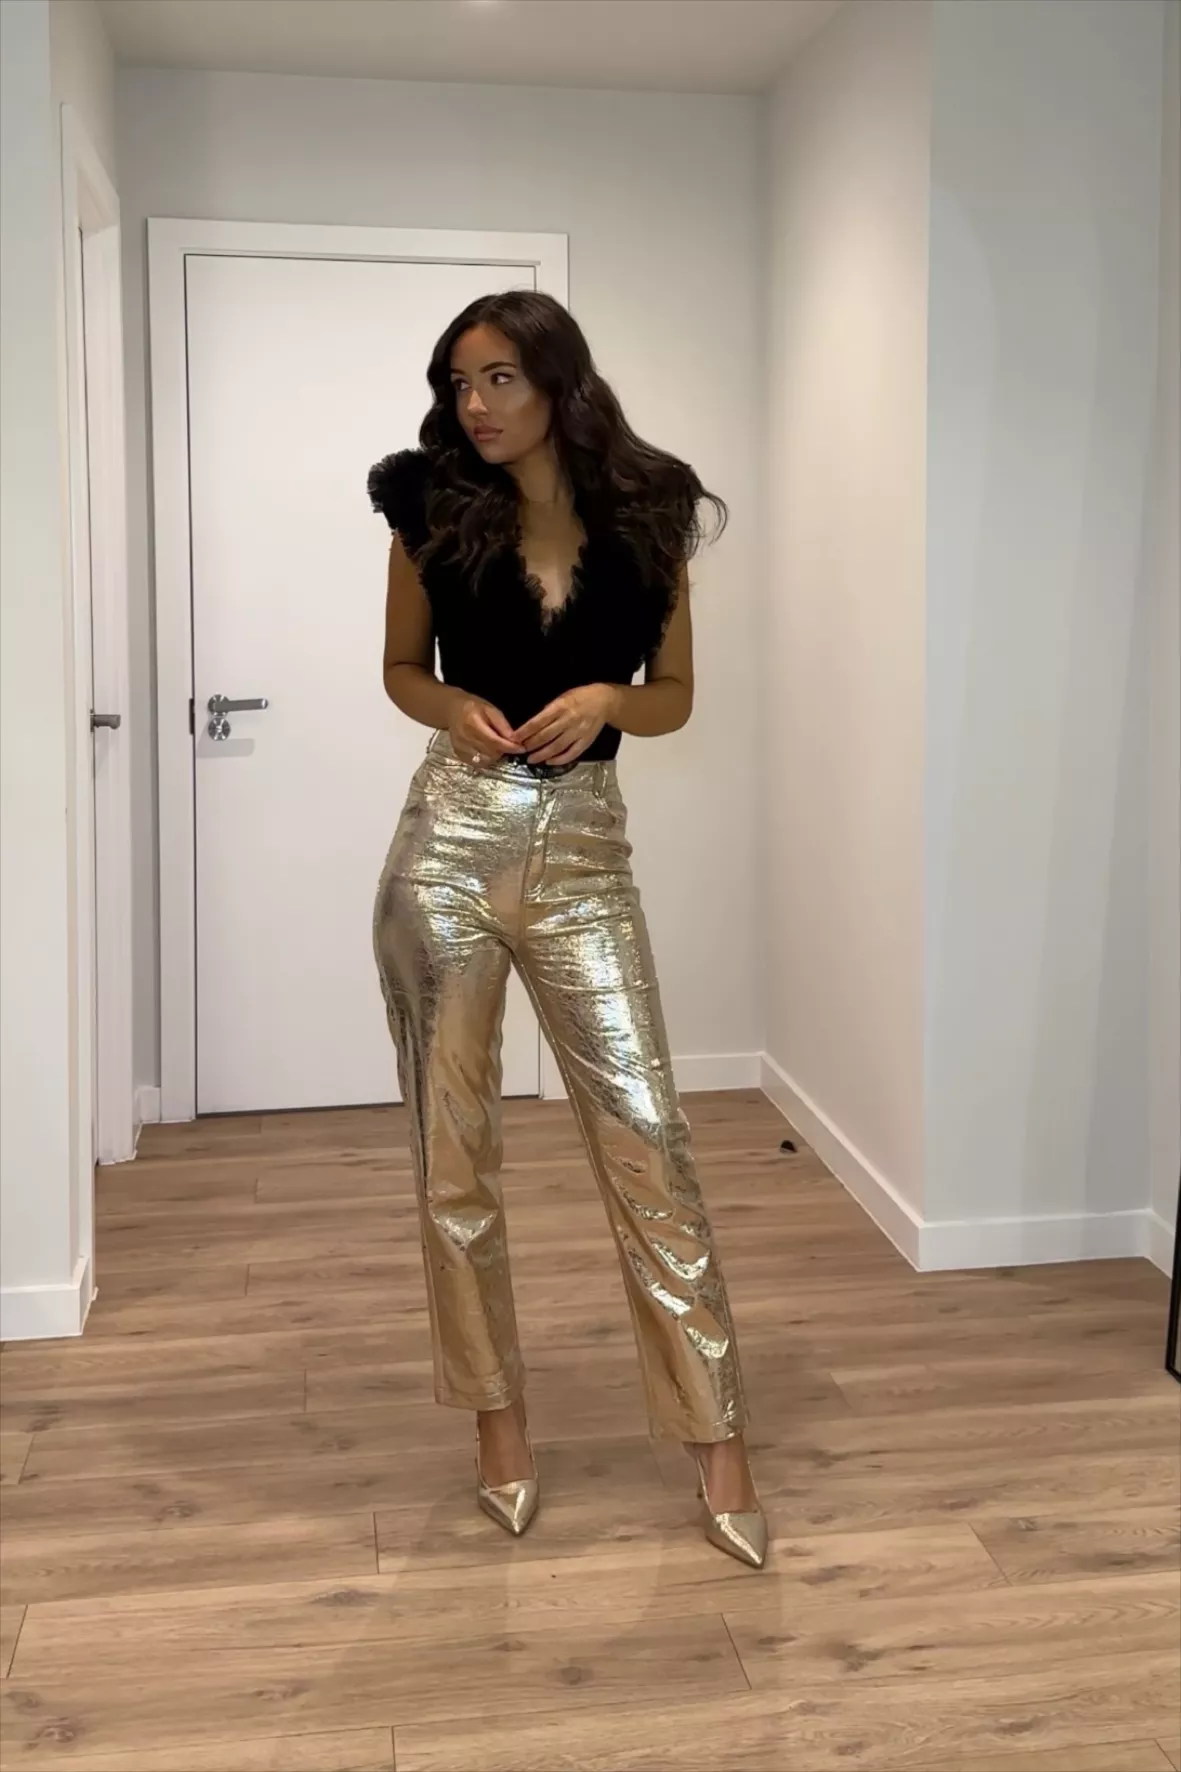 Shiny Leggings Gold - Party WOW